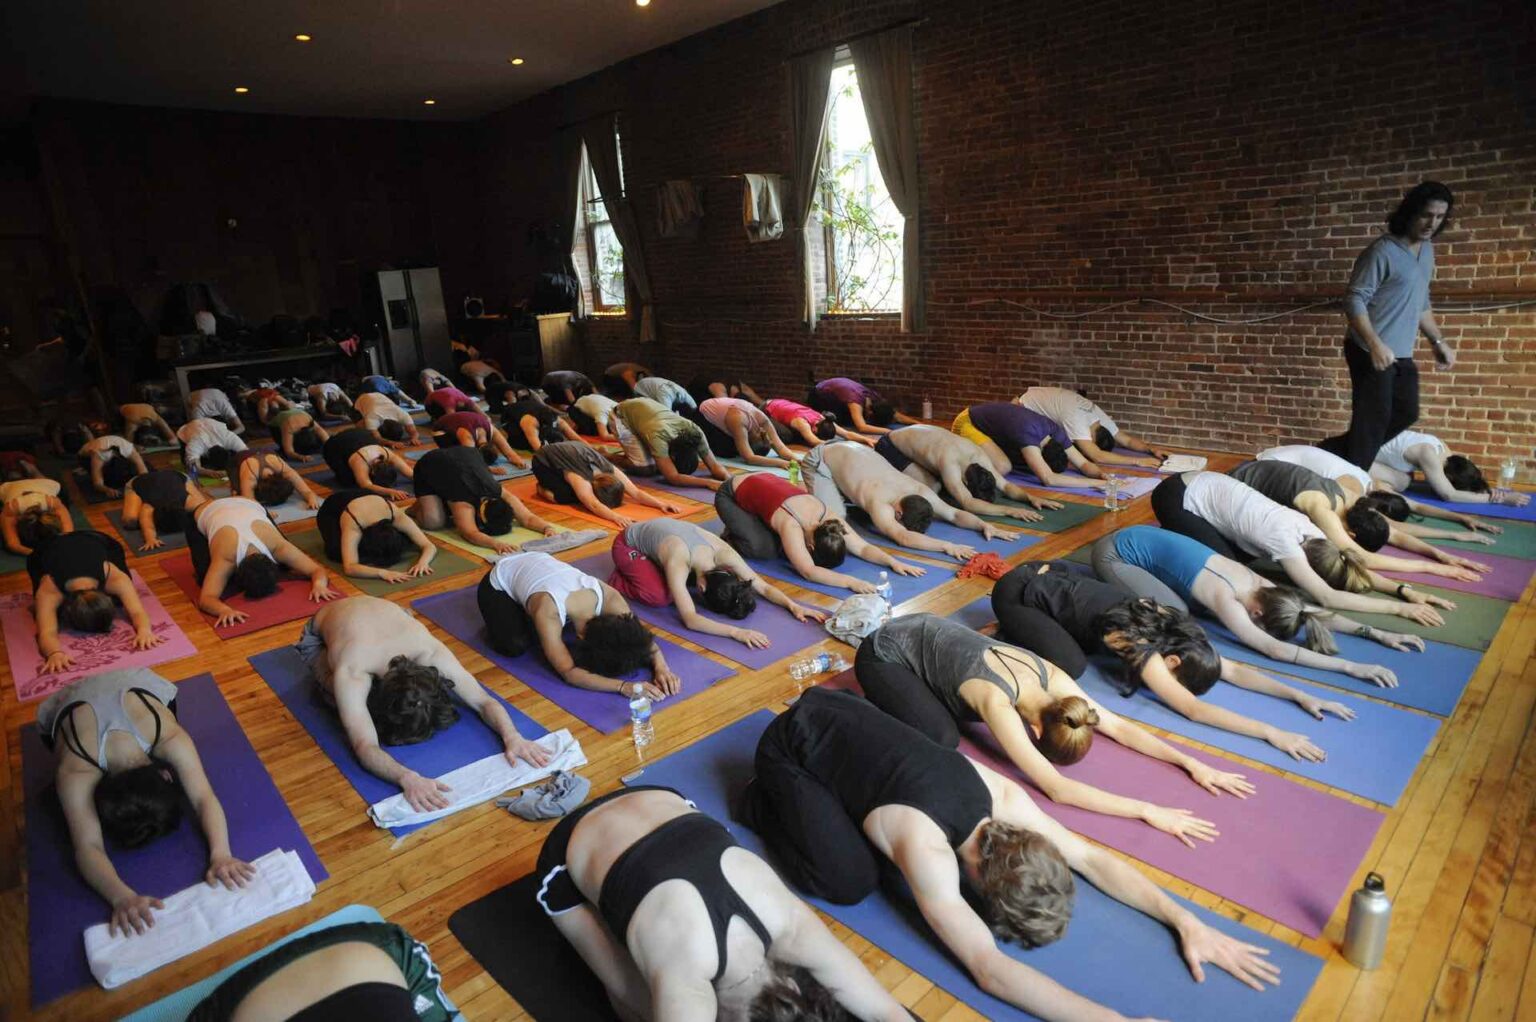 Yoga to the People was a popular chain of yoga studios, however in July they announced they were closing all locations permanently.